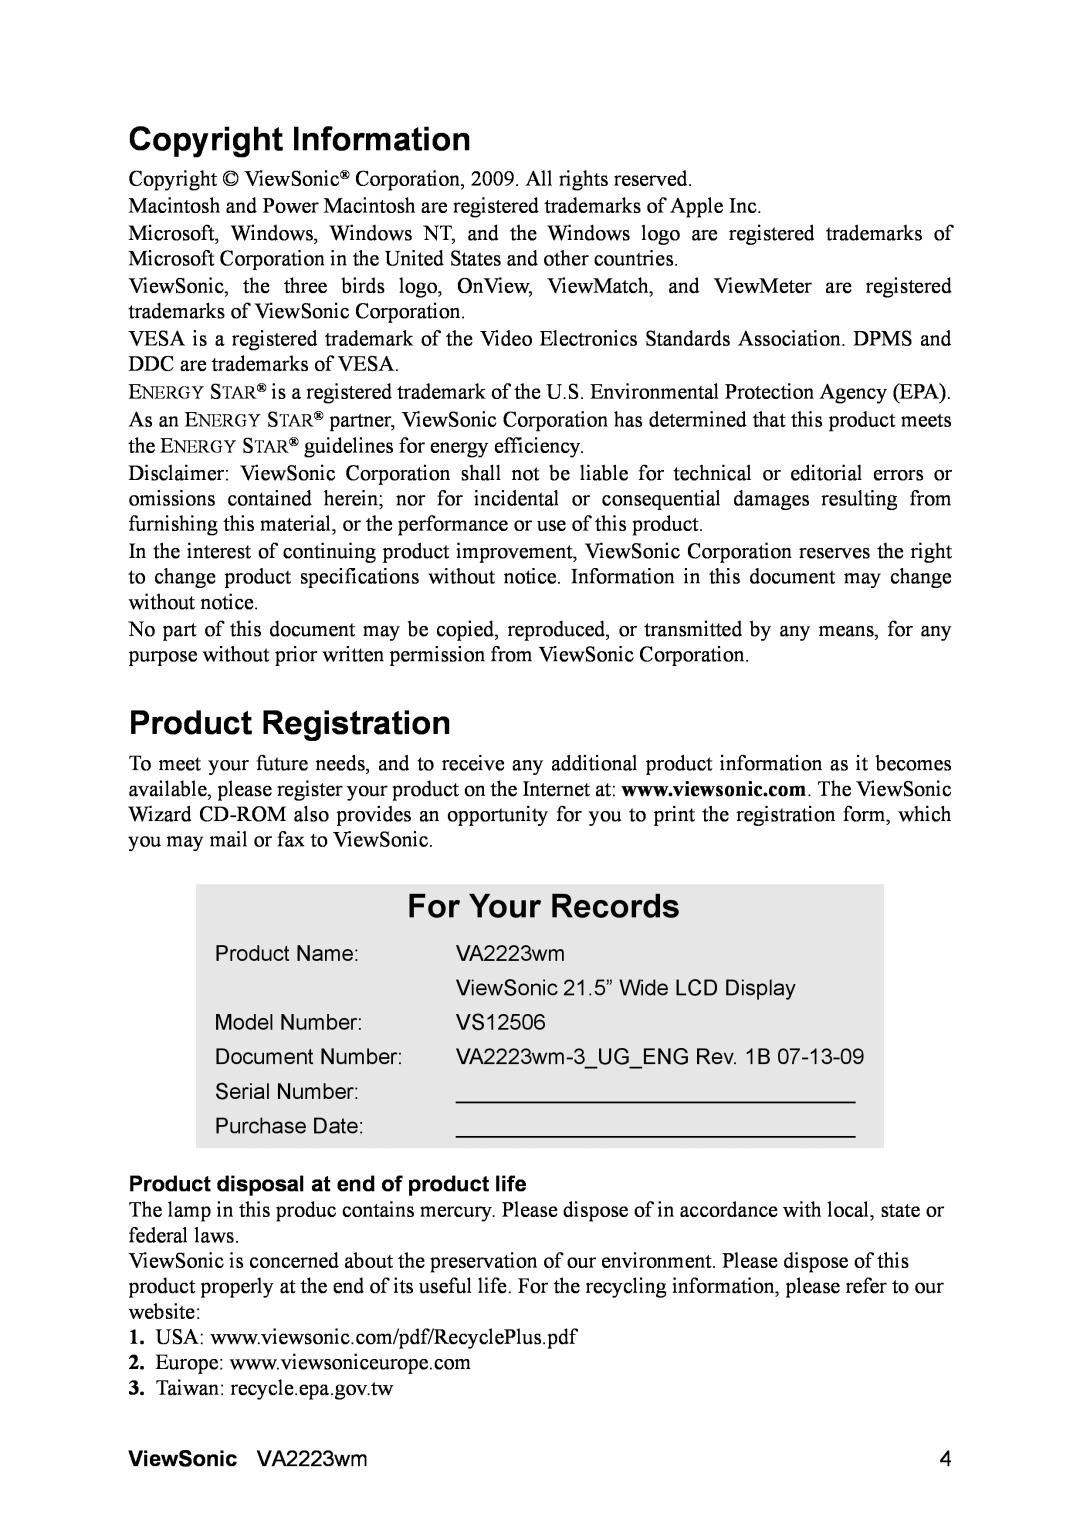 ViewSonic VS12506 Copyright Information, Product Registration, For Your Records, Product disposal at end of product life 